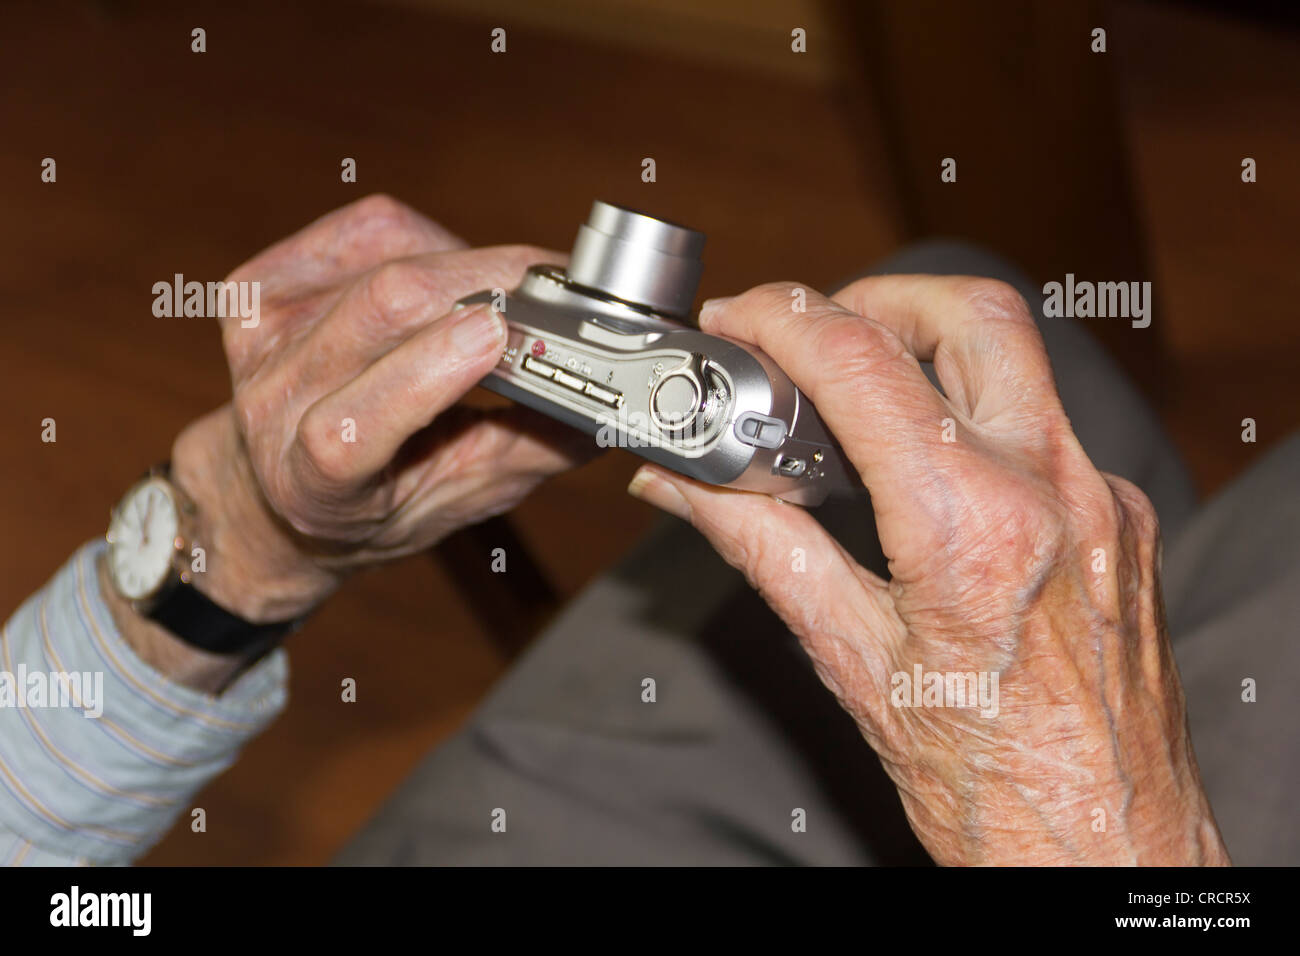 Old person's hands holding a digital camera, nursing home, retirement home, Berlin, Germany, Europ Stock Photo